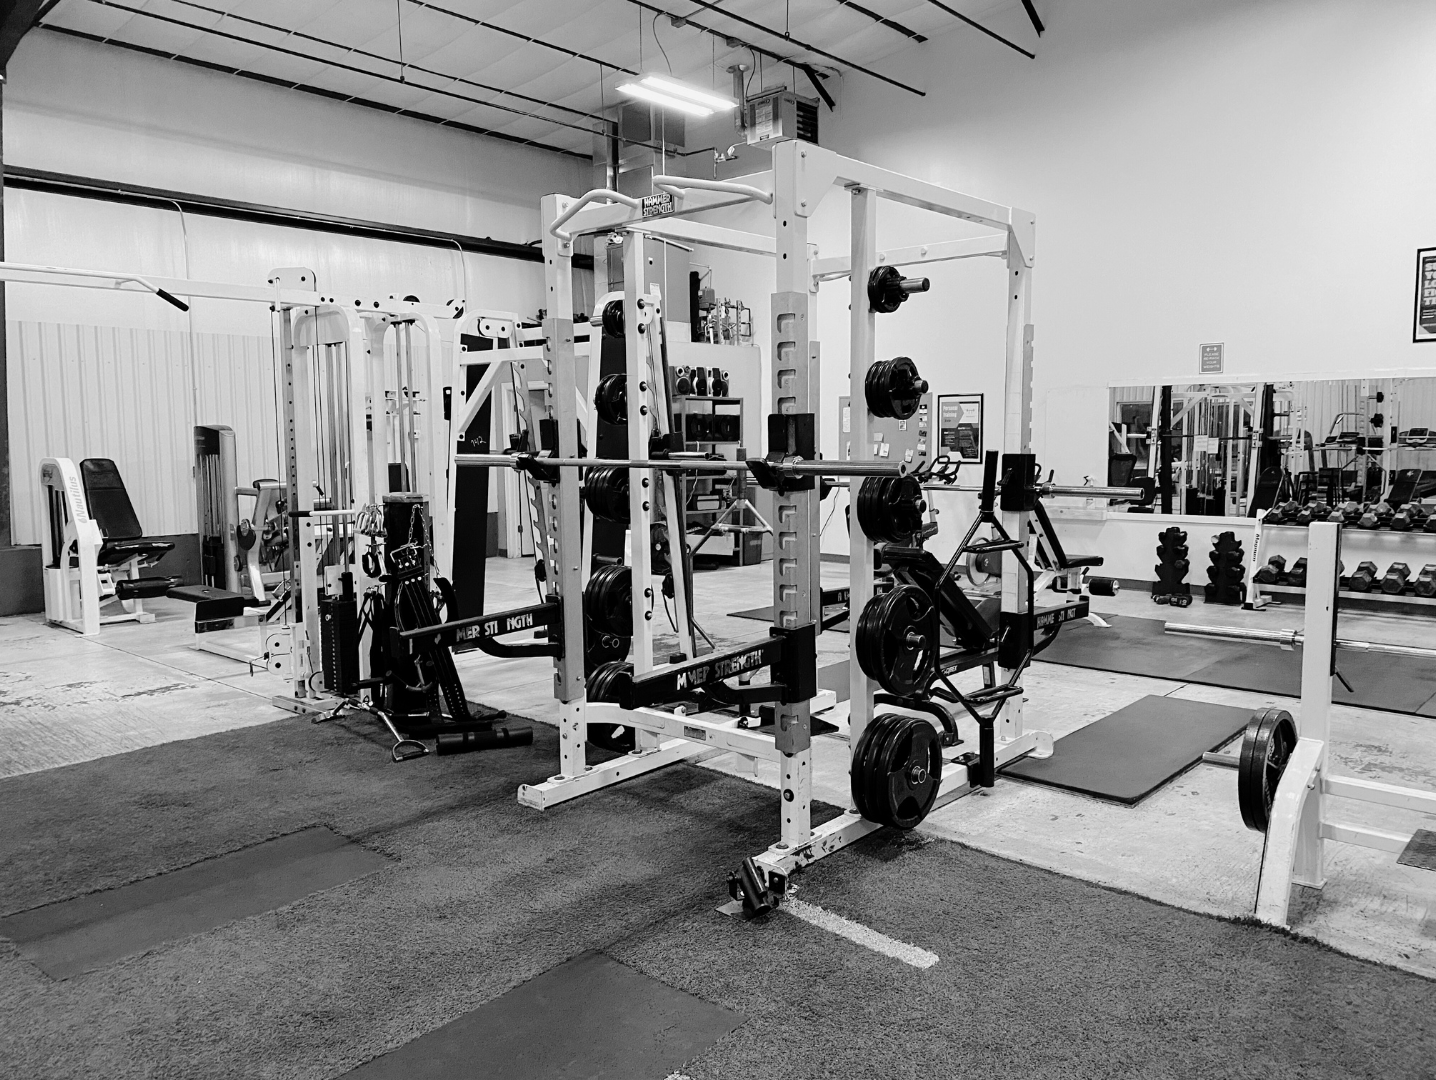 Background image of a squat rack in black and white